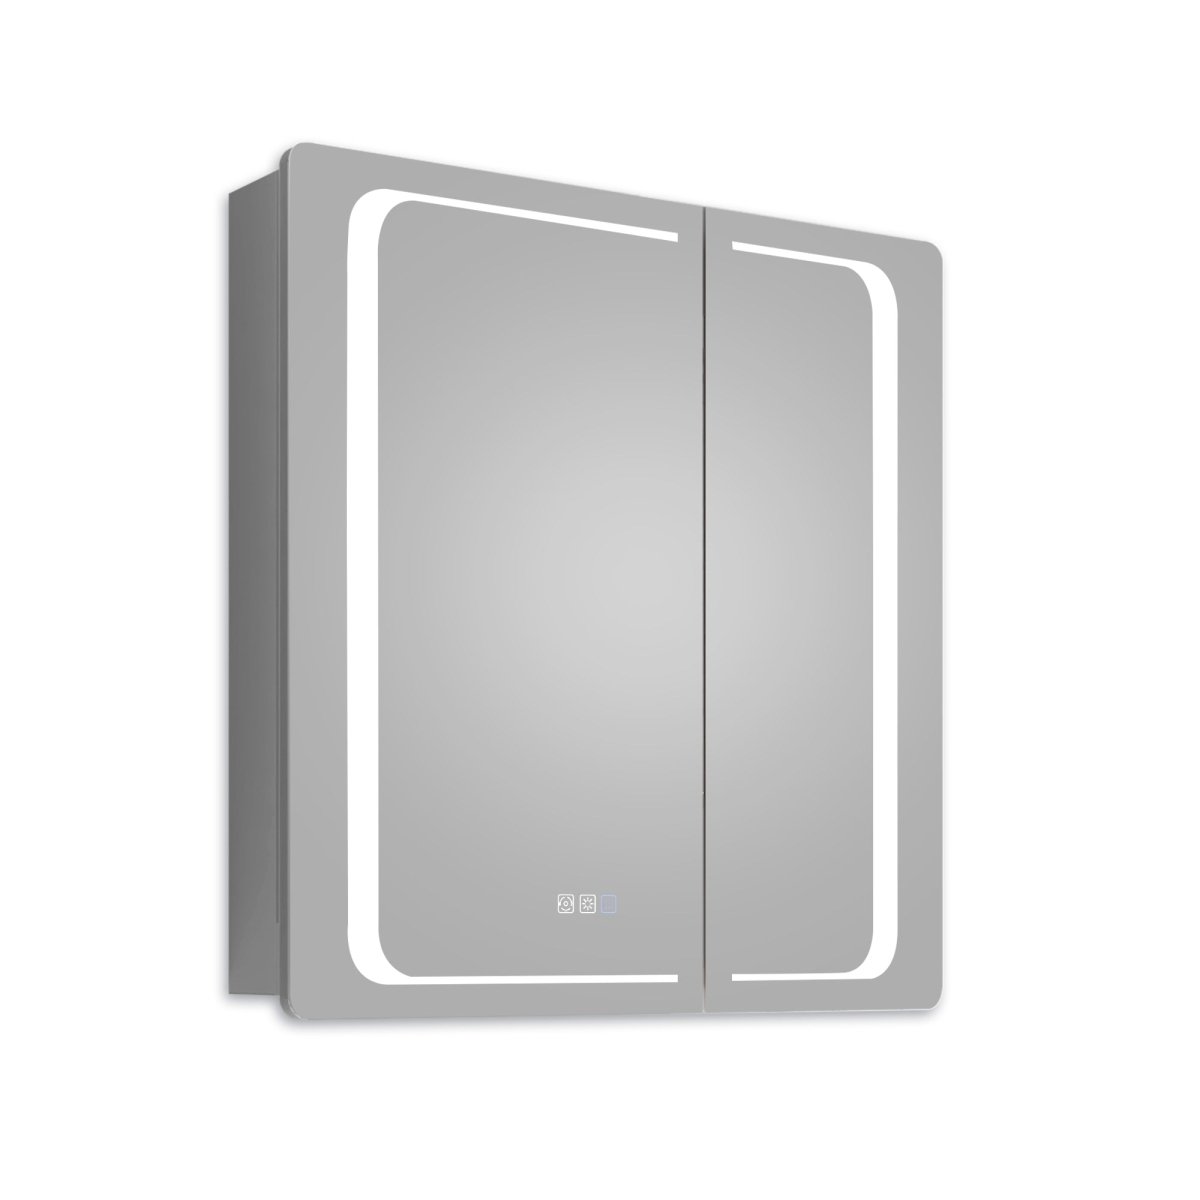 ExBrite 30" W x 32" H LED Lighted Bathroom Medicine Cabinet with Mirror Recessed or Surface Mounted LED Medicine Cabinet - ExBriteUSA